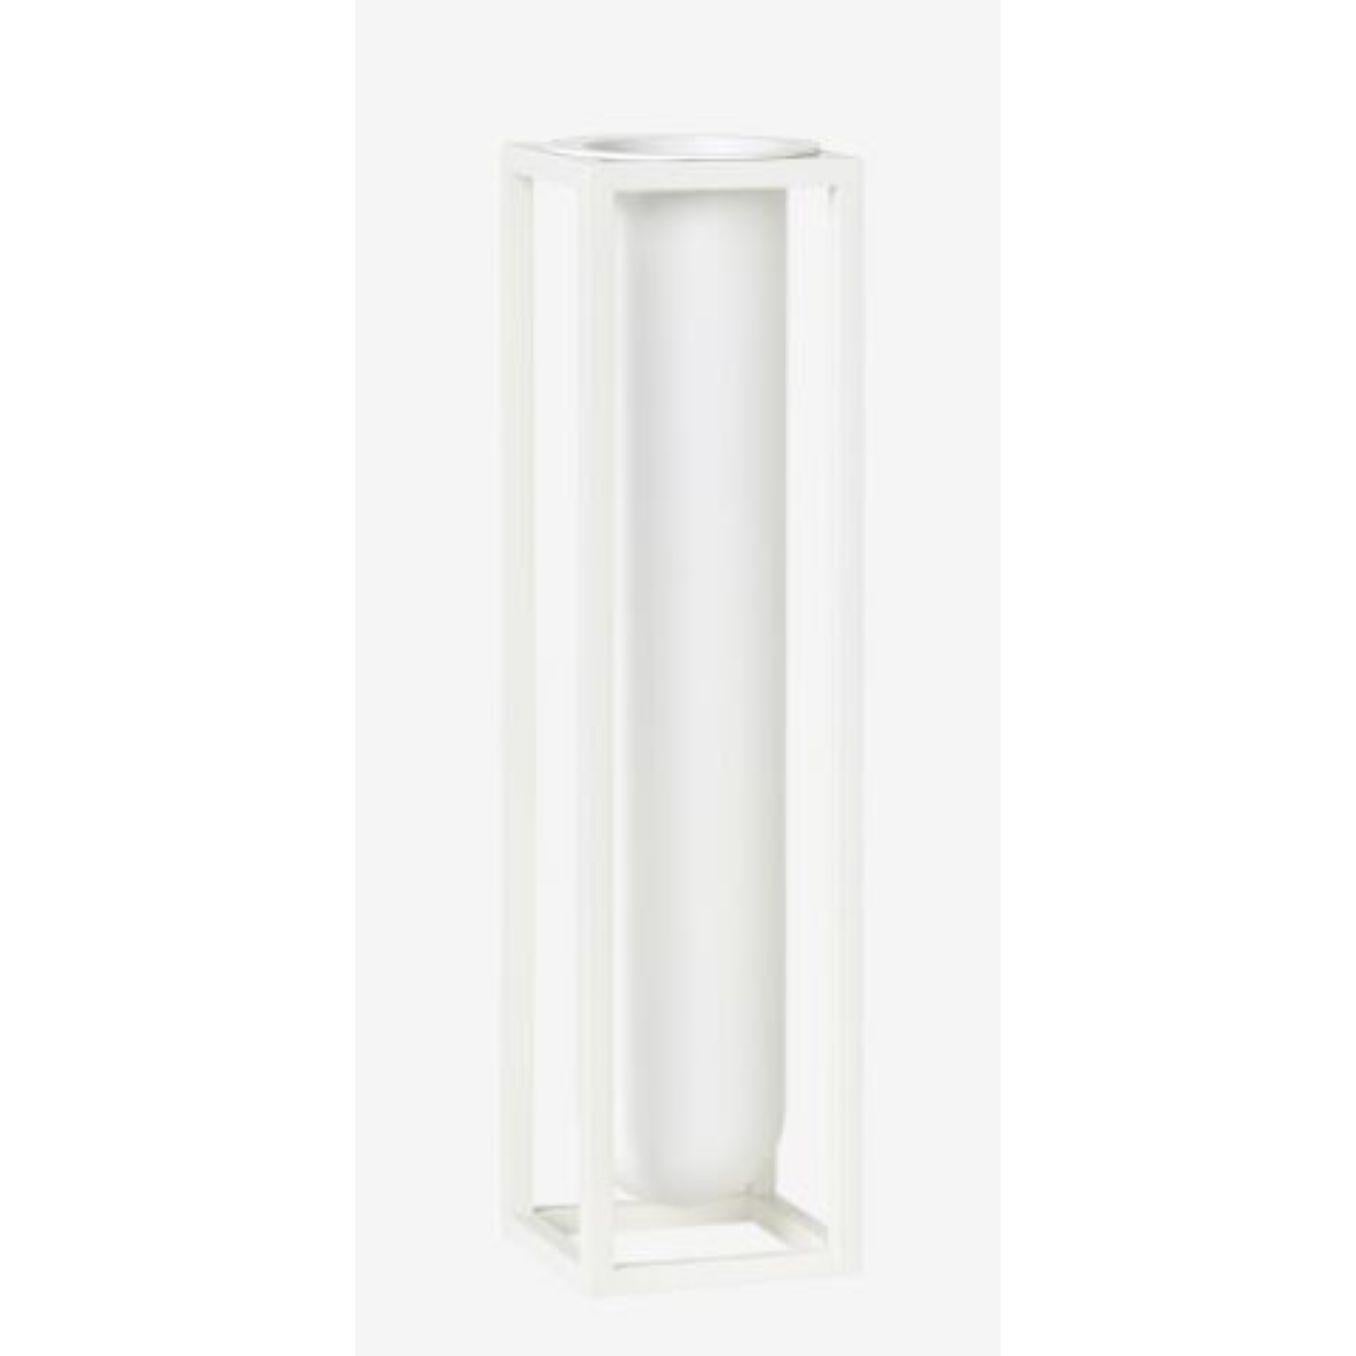 White flora Kubus vase by Lassen
Dimensions: D 6 x W 6 x H 24 cm 
Materials: Metal 
Weight: 2.00 kg

As the sun’s rays slide though the windows, invite nature inside by placing an elegant flower in the Kubus vase flora, or filling it with a